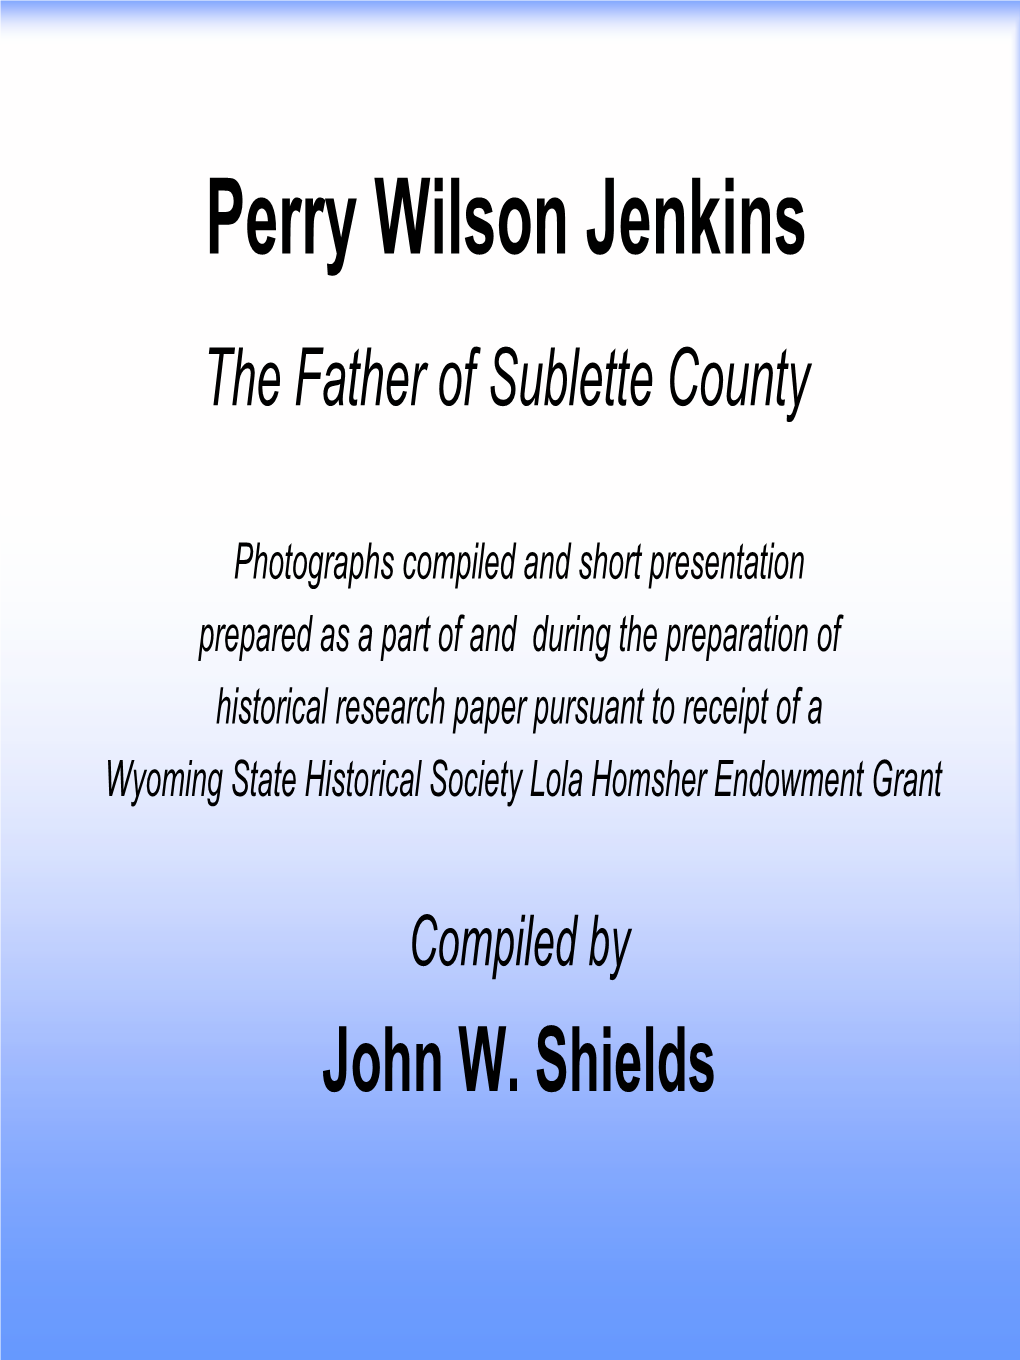 Perry Wilson Jenkins the Father of Sublette County